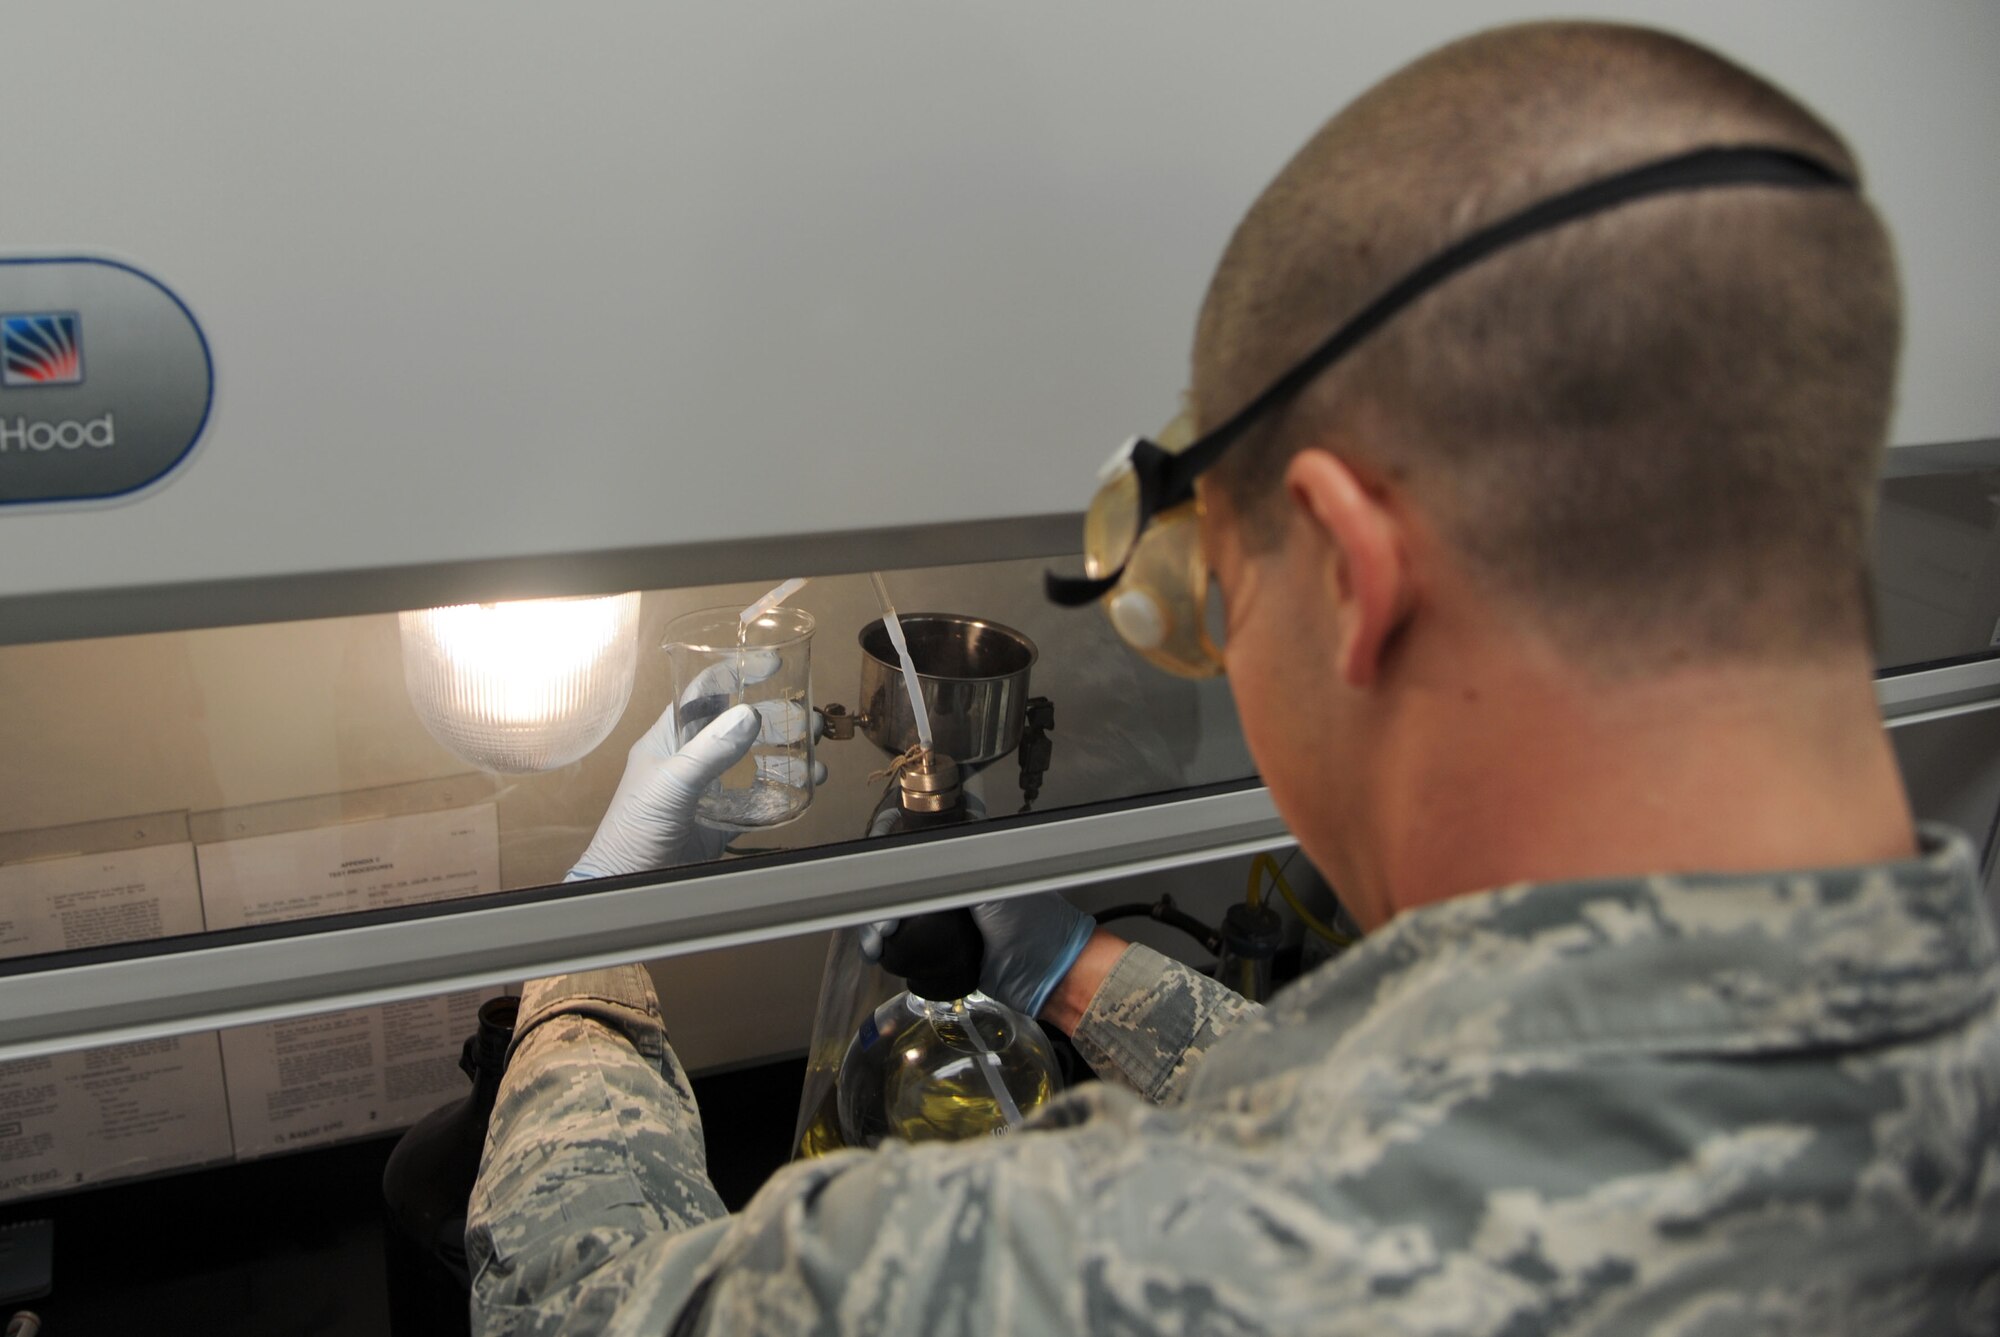 ALTUS AIR FORCE BASE, Okla. – U.S. Air Force Senior Airman Zakkary Wiest, 97th Logistics Readiness Squadron fuels apprentice, finishes a fuel sample test Jan. 31, 2014. The samples have to undergo many tests to ensure the fuel is clean, dry and useable by the aircraft. (U.S. Air Force photo by Airman 1st Class J. Zuriel Lee/Released)